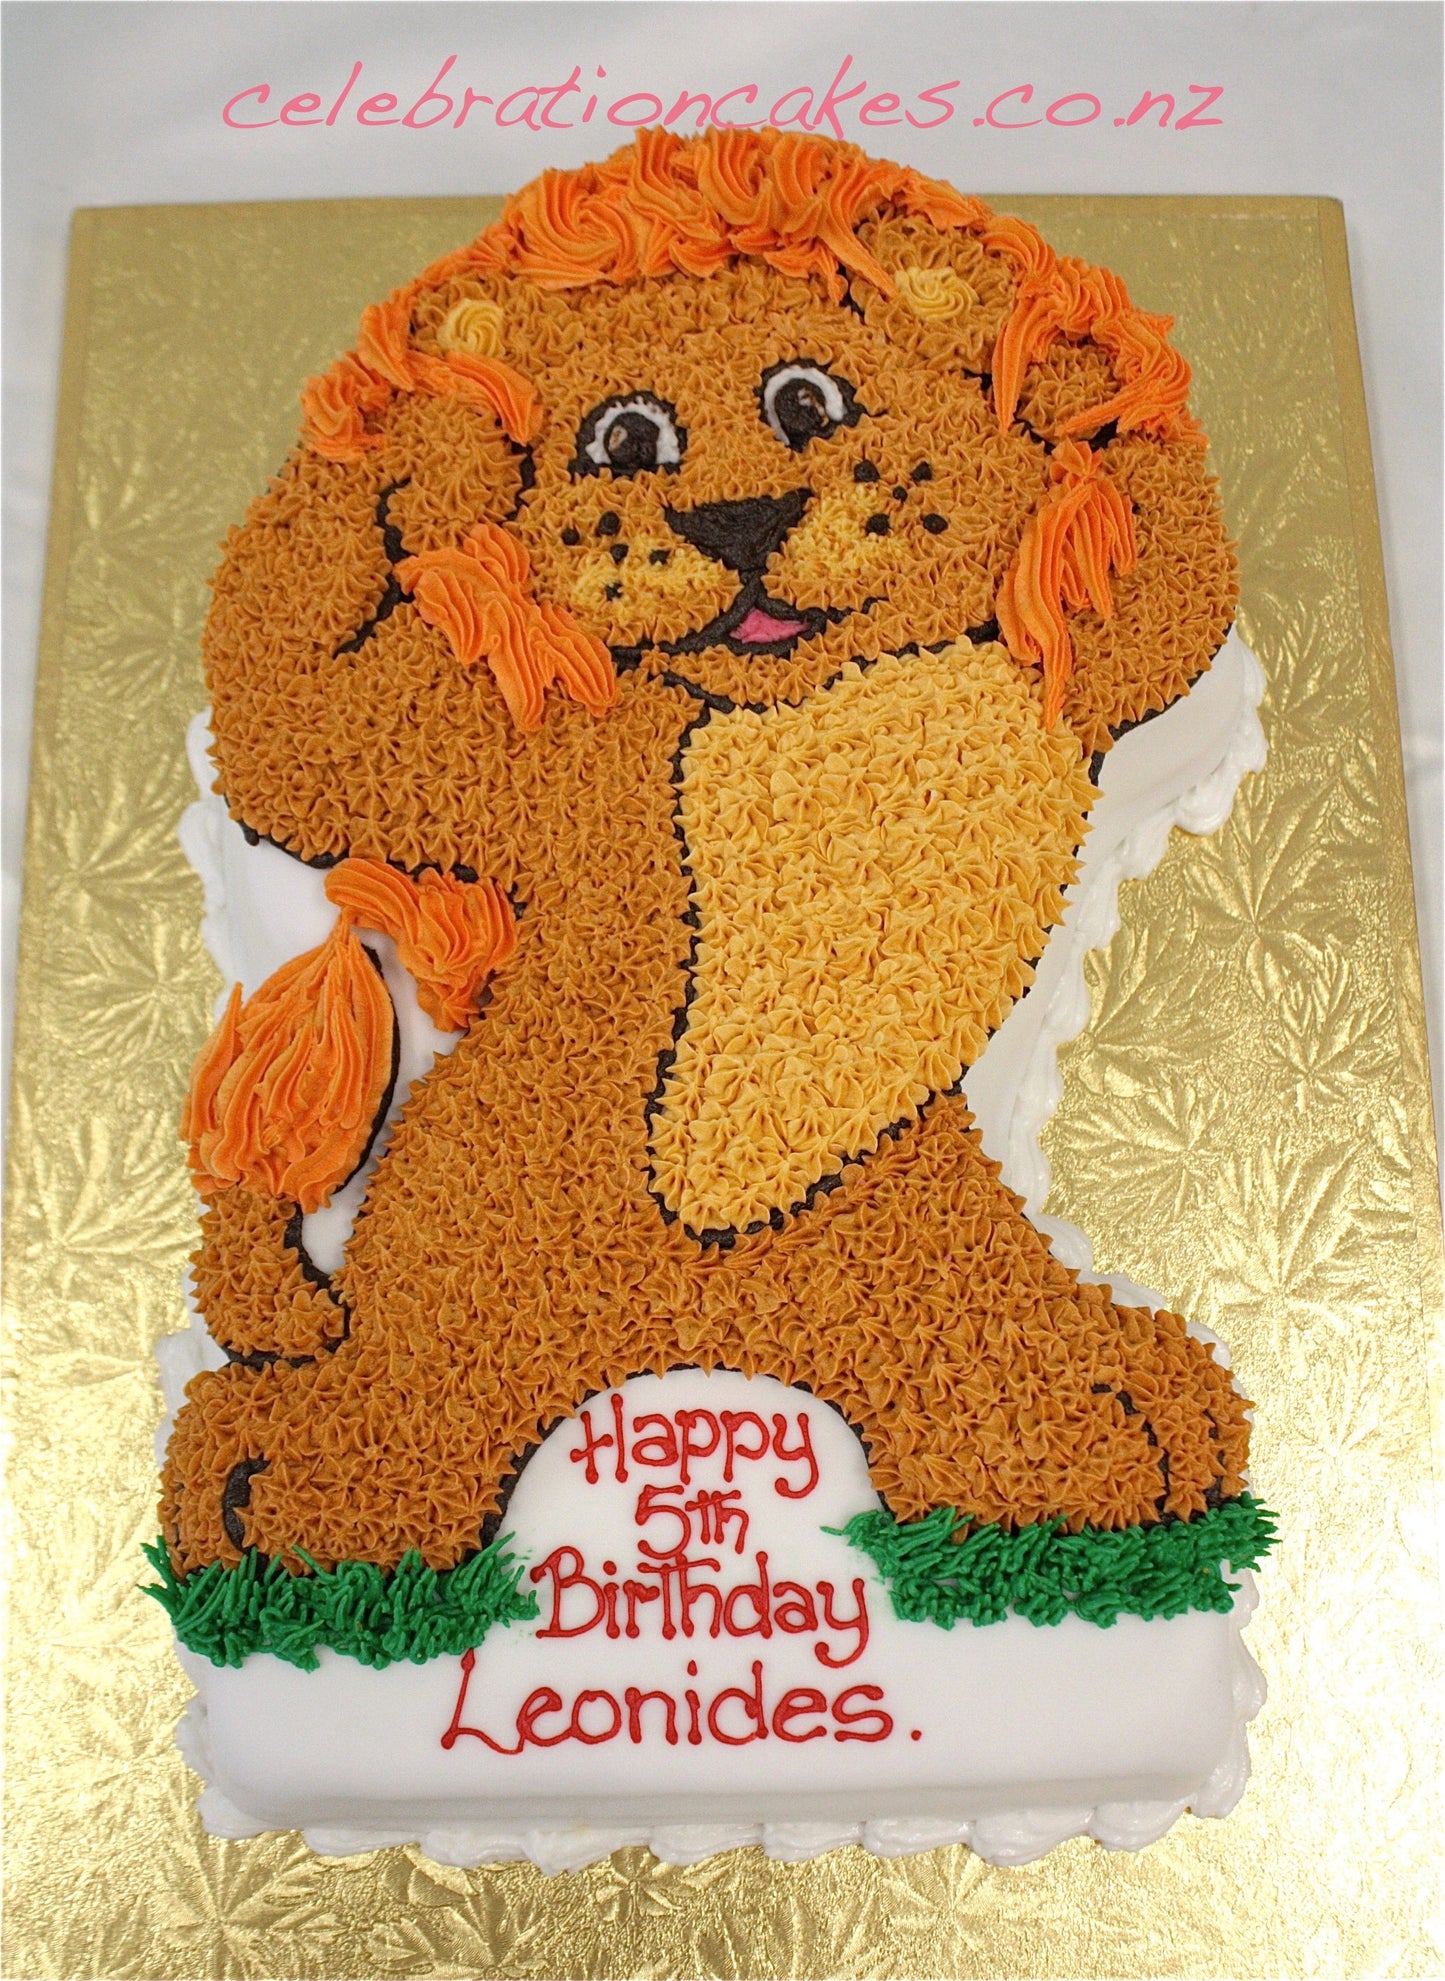 2D Lion – Celebration Cakes- Cakes and Decorating Supplies, NZ